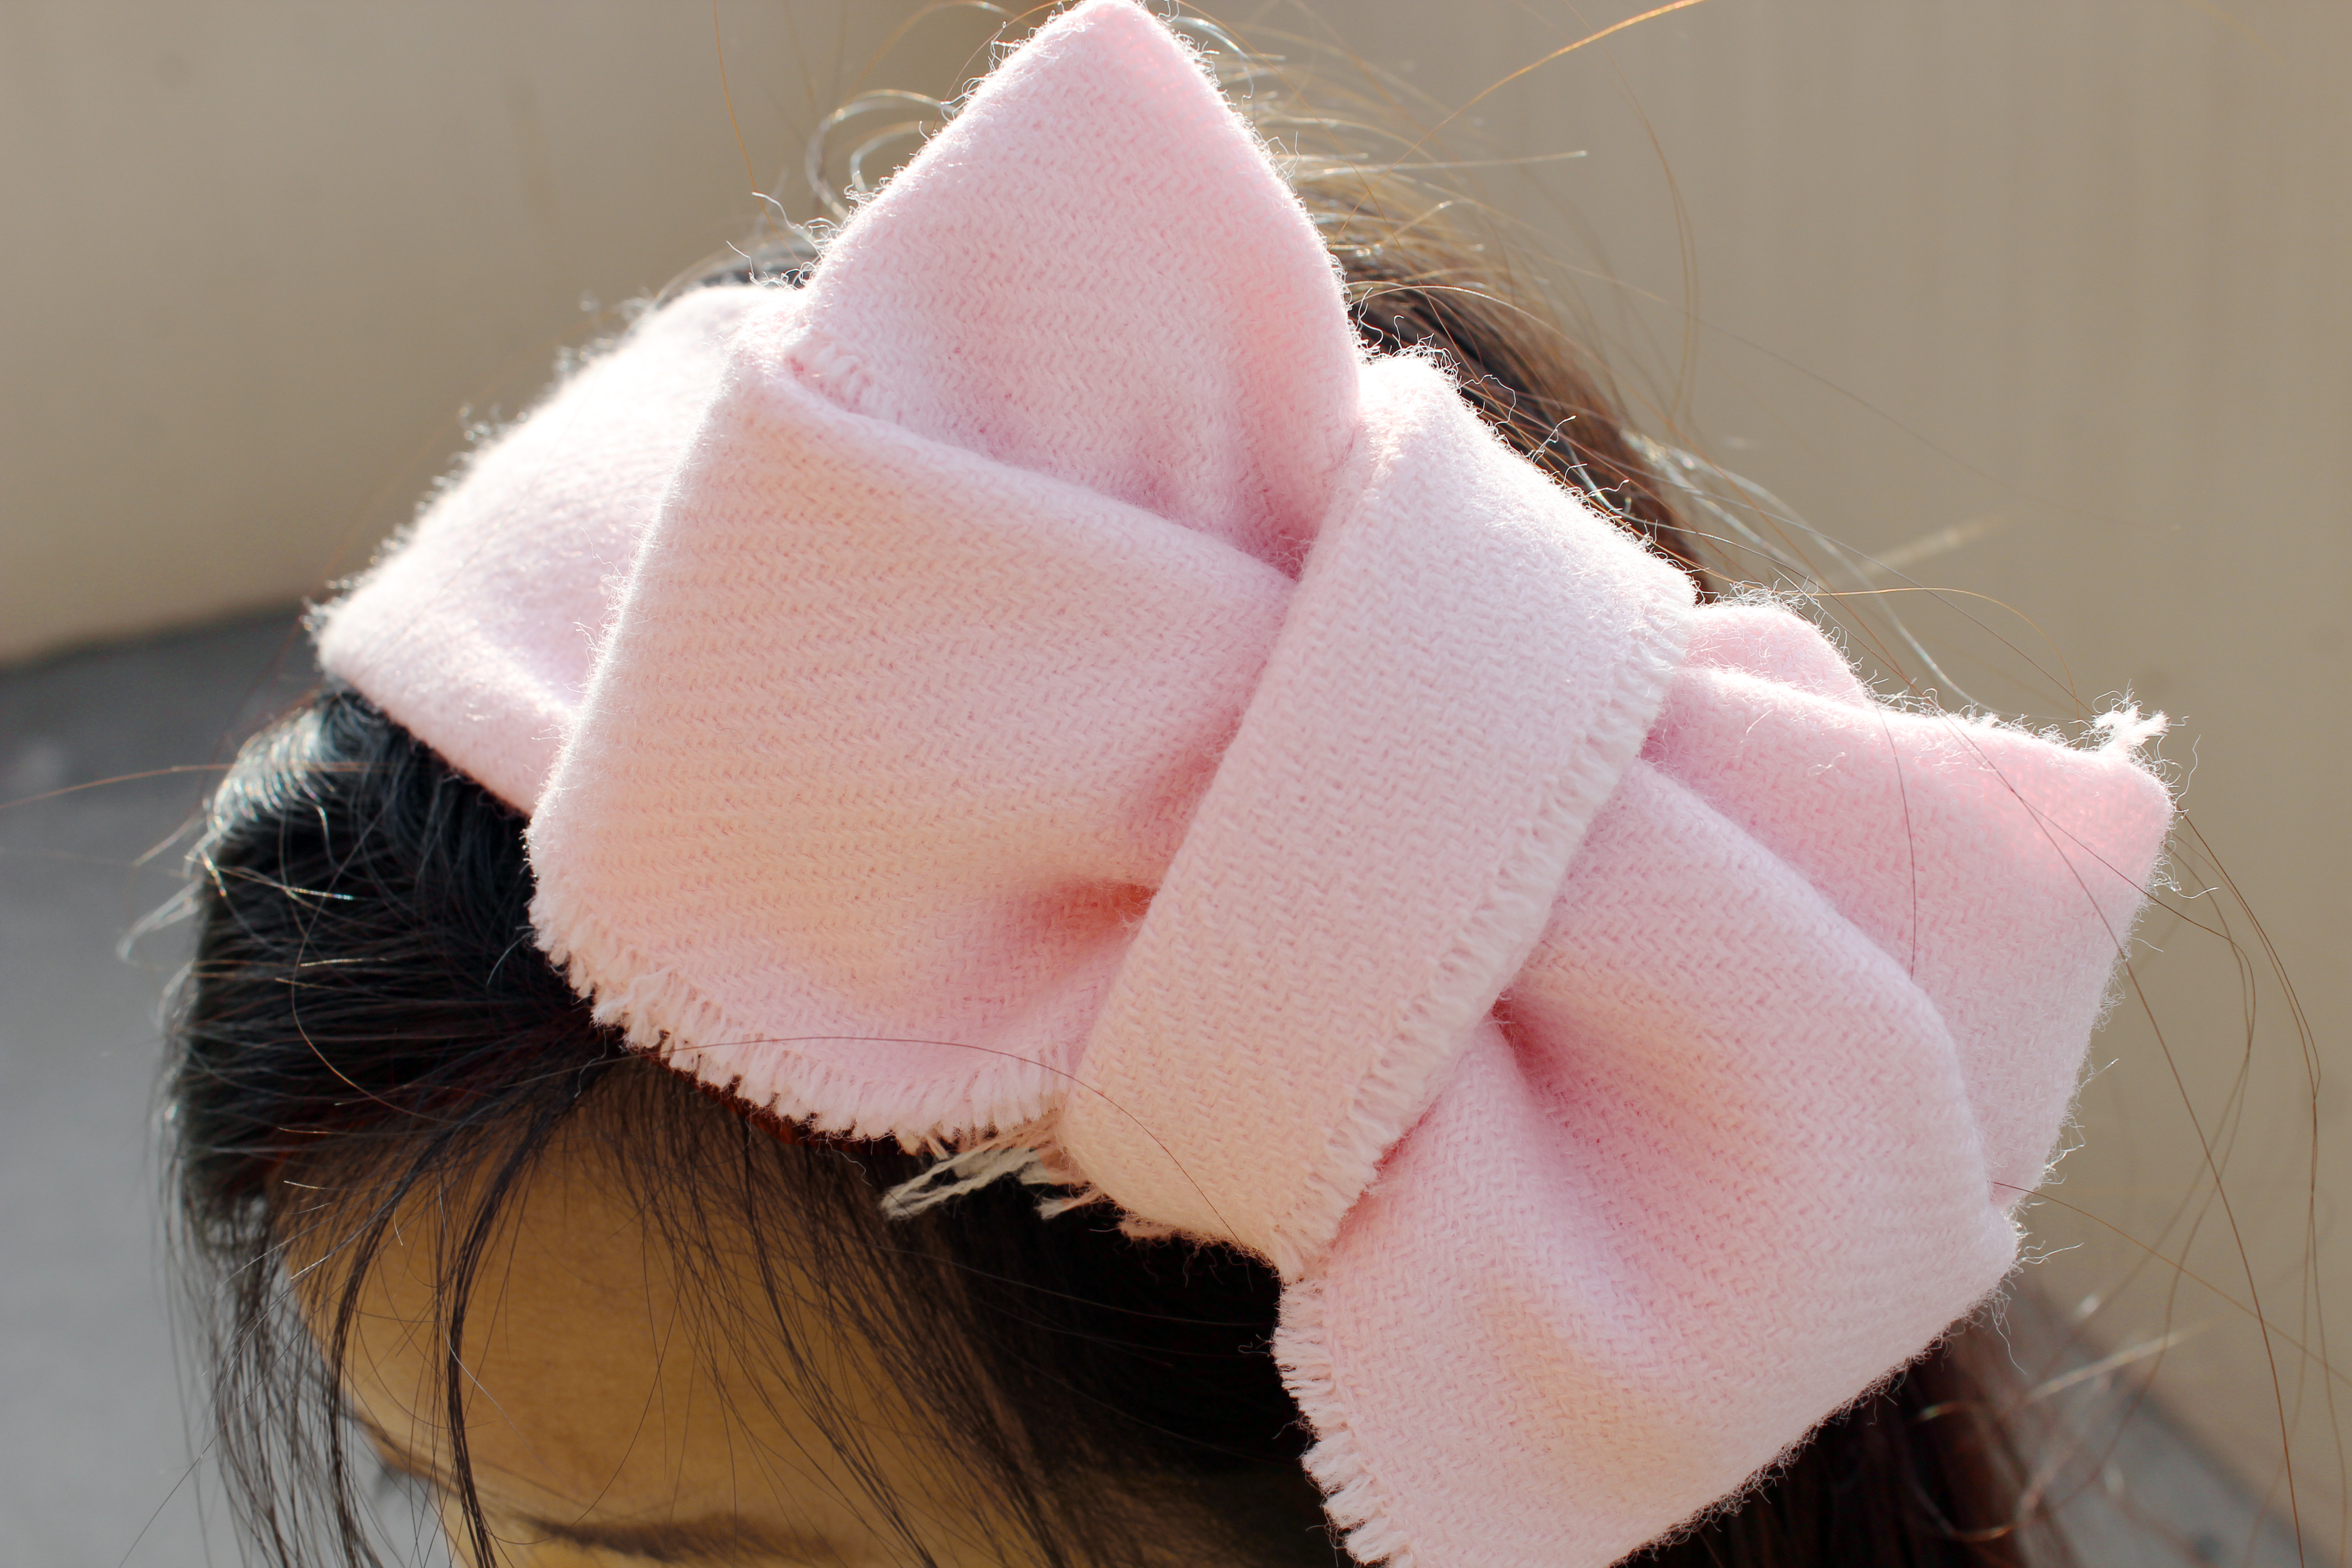 Tie your outfit together with cute bows